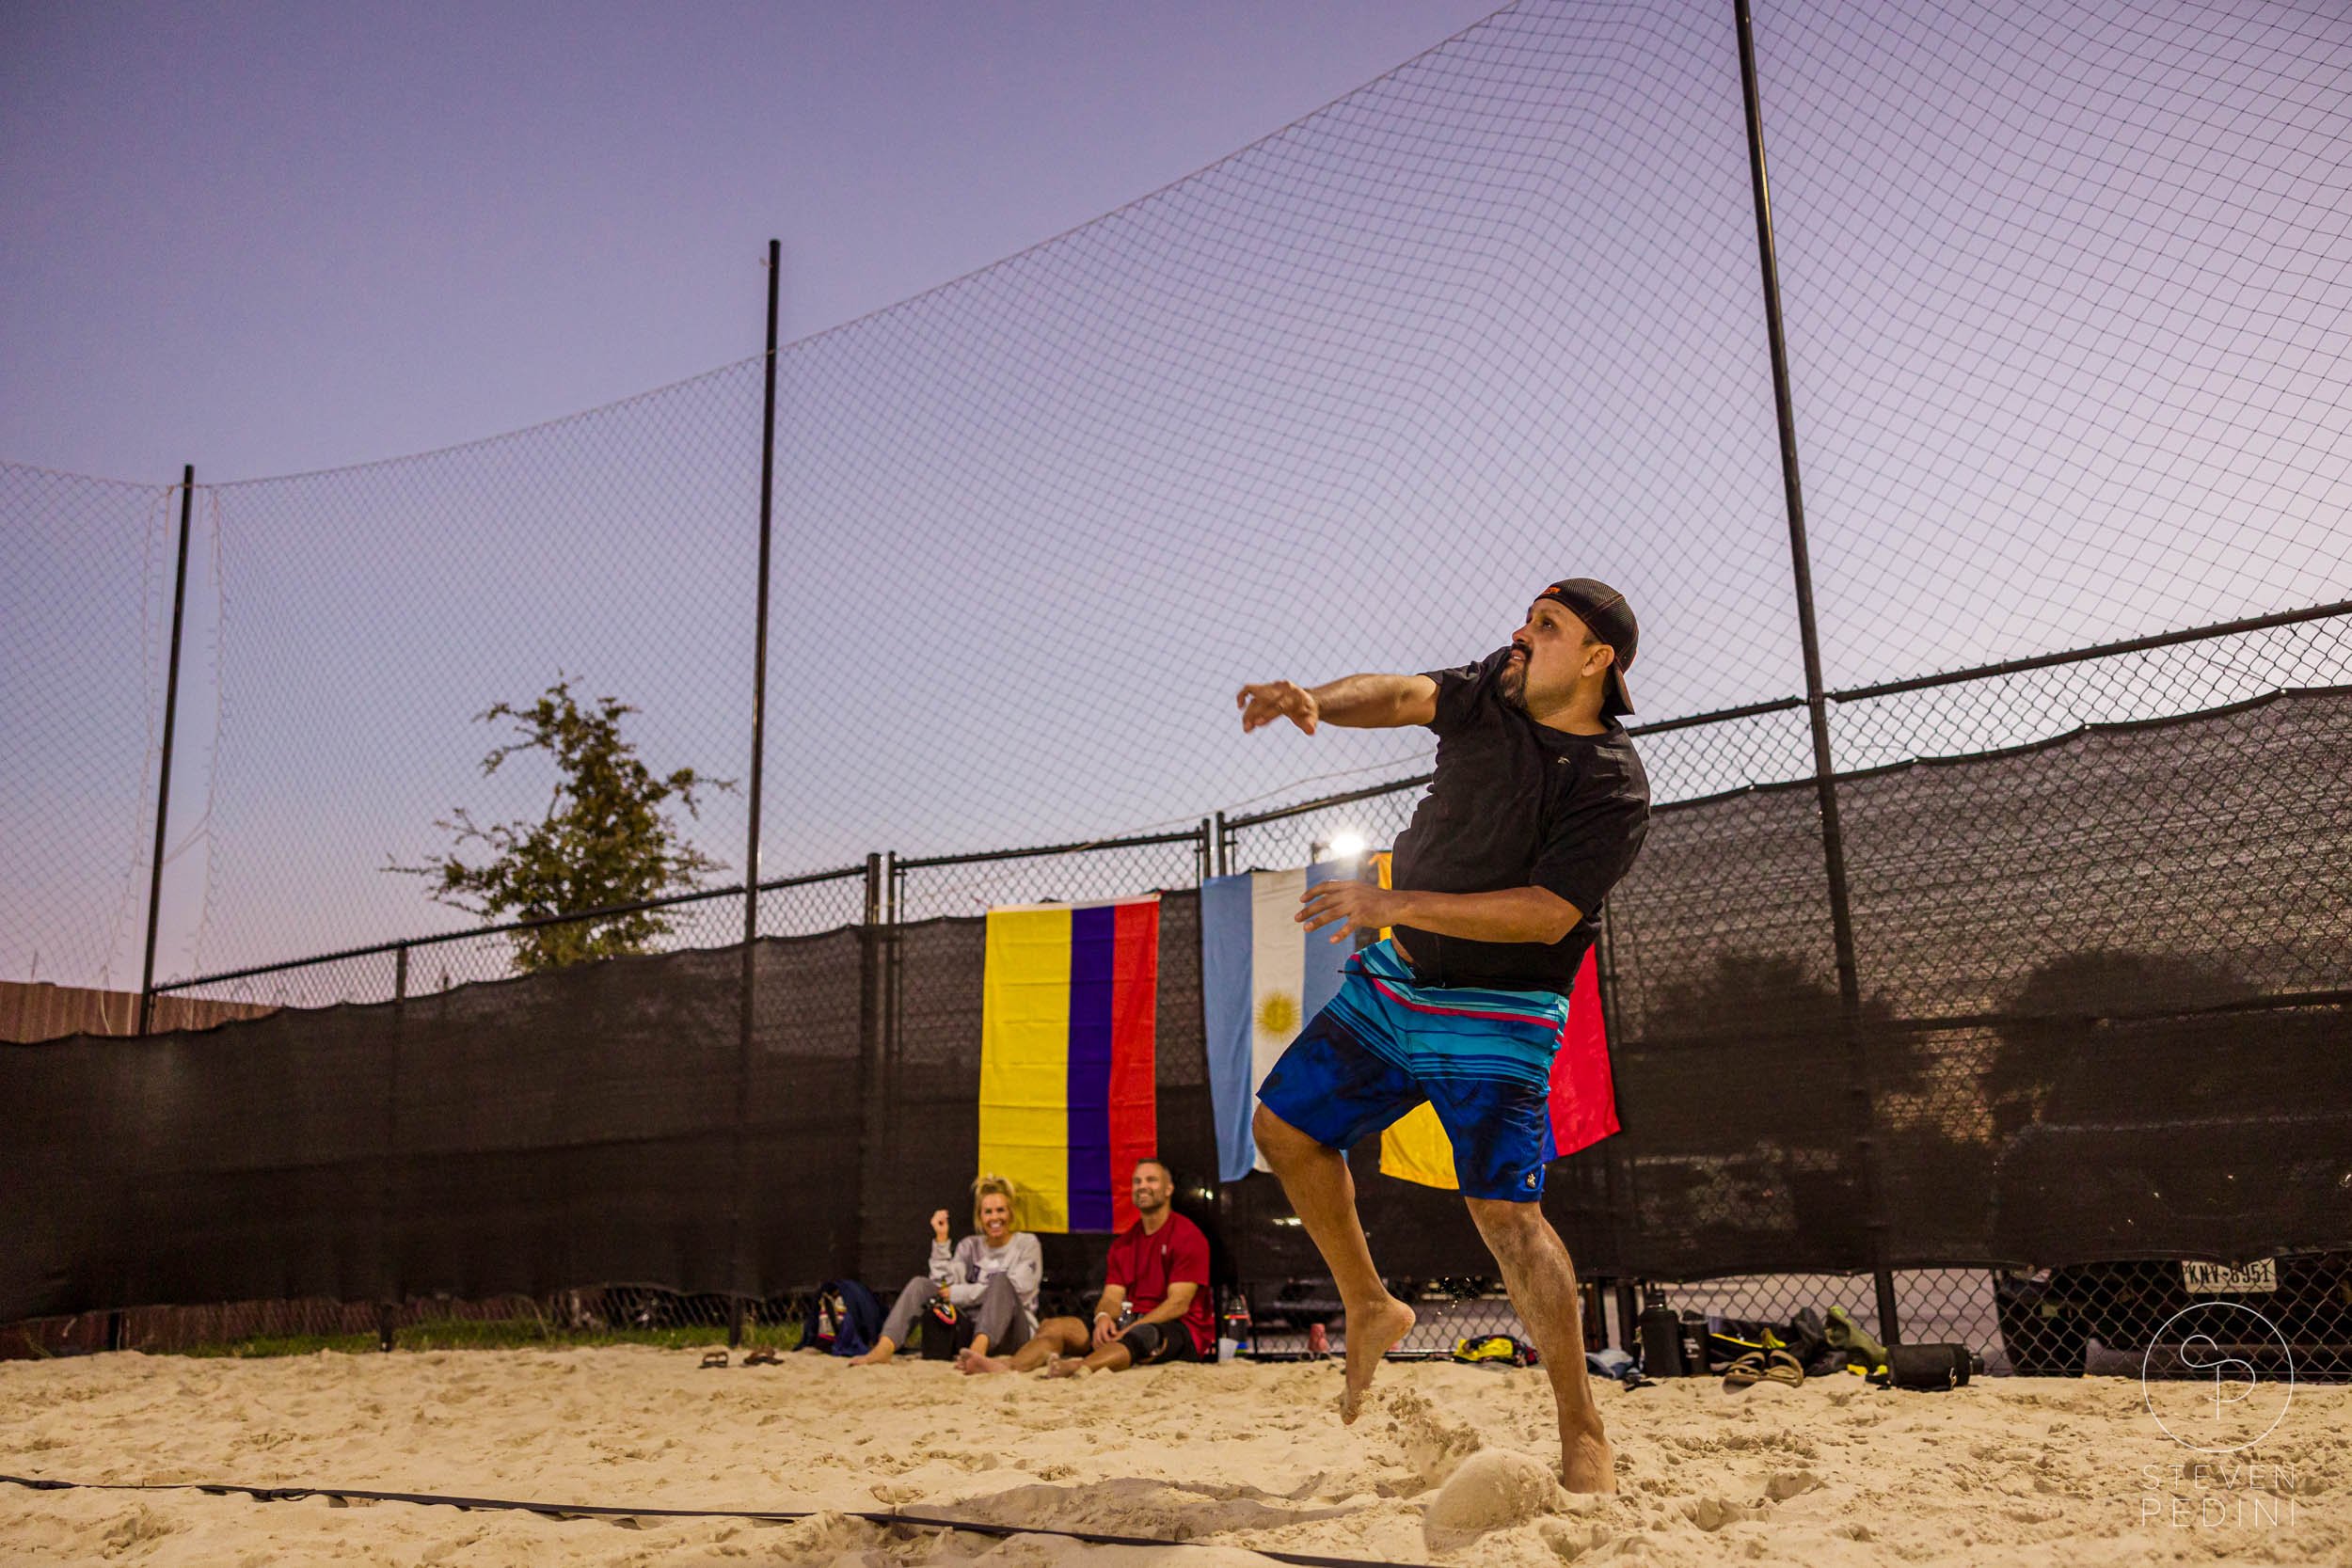 Steven Pedini Photography - Bumpy Pickle - Sand Volleyball - Houston TX - World Cup of Volleyball - 00297.jpg